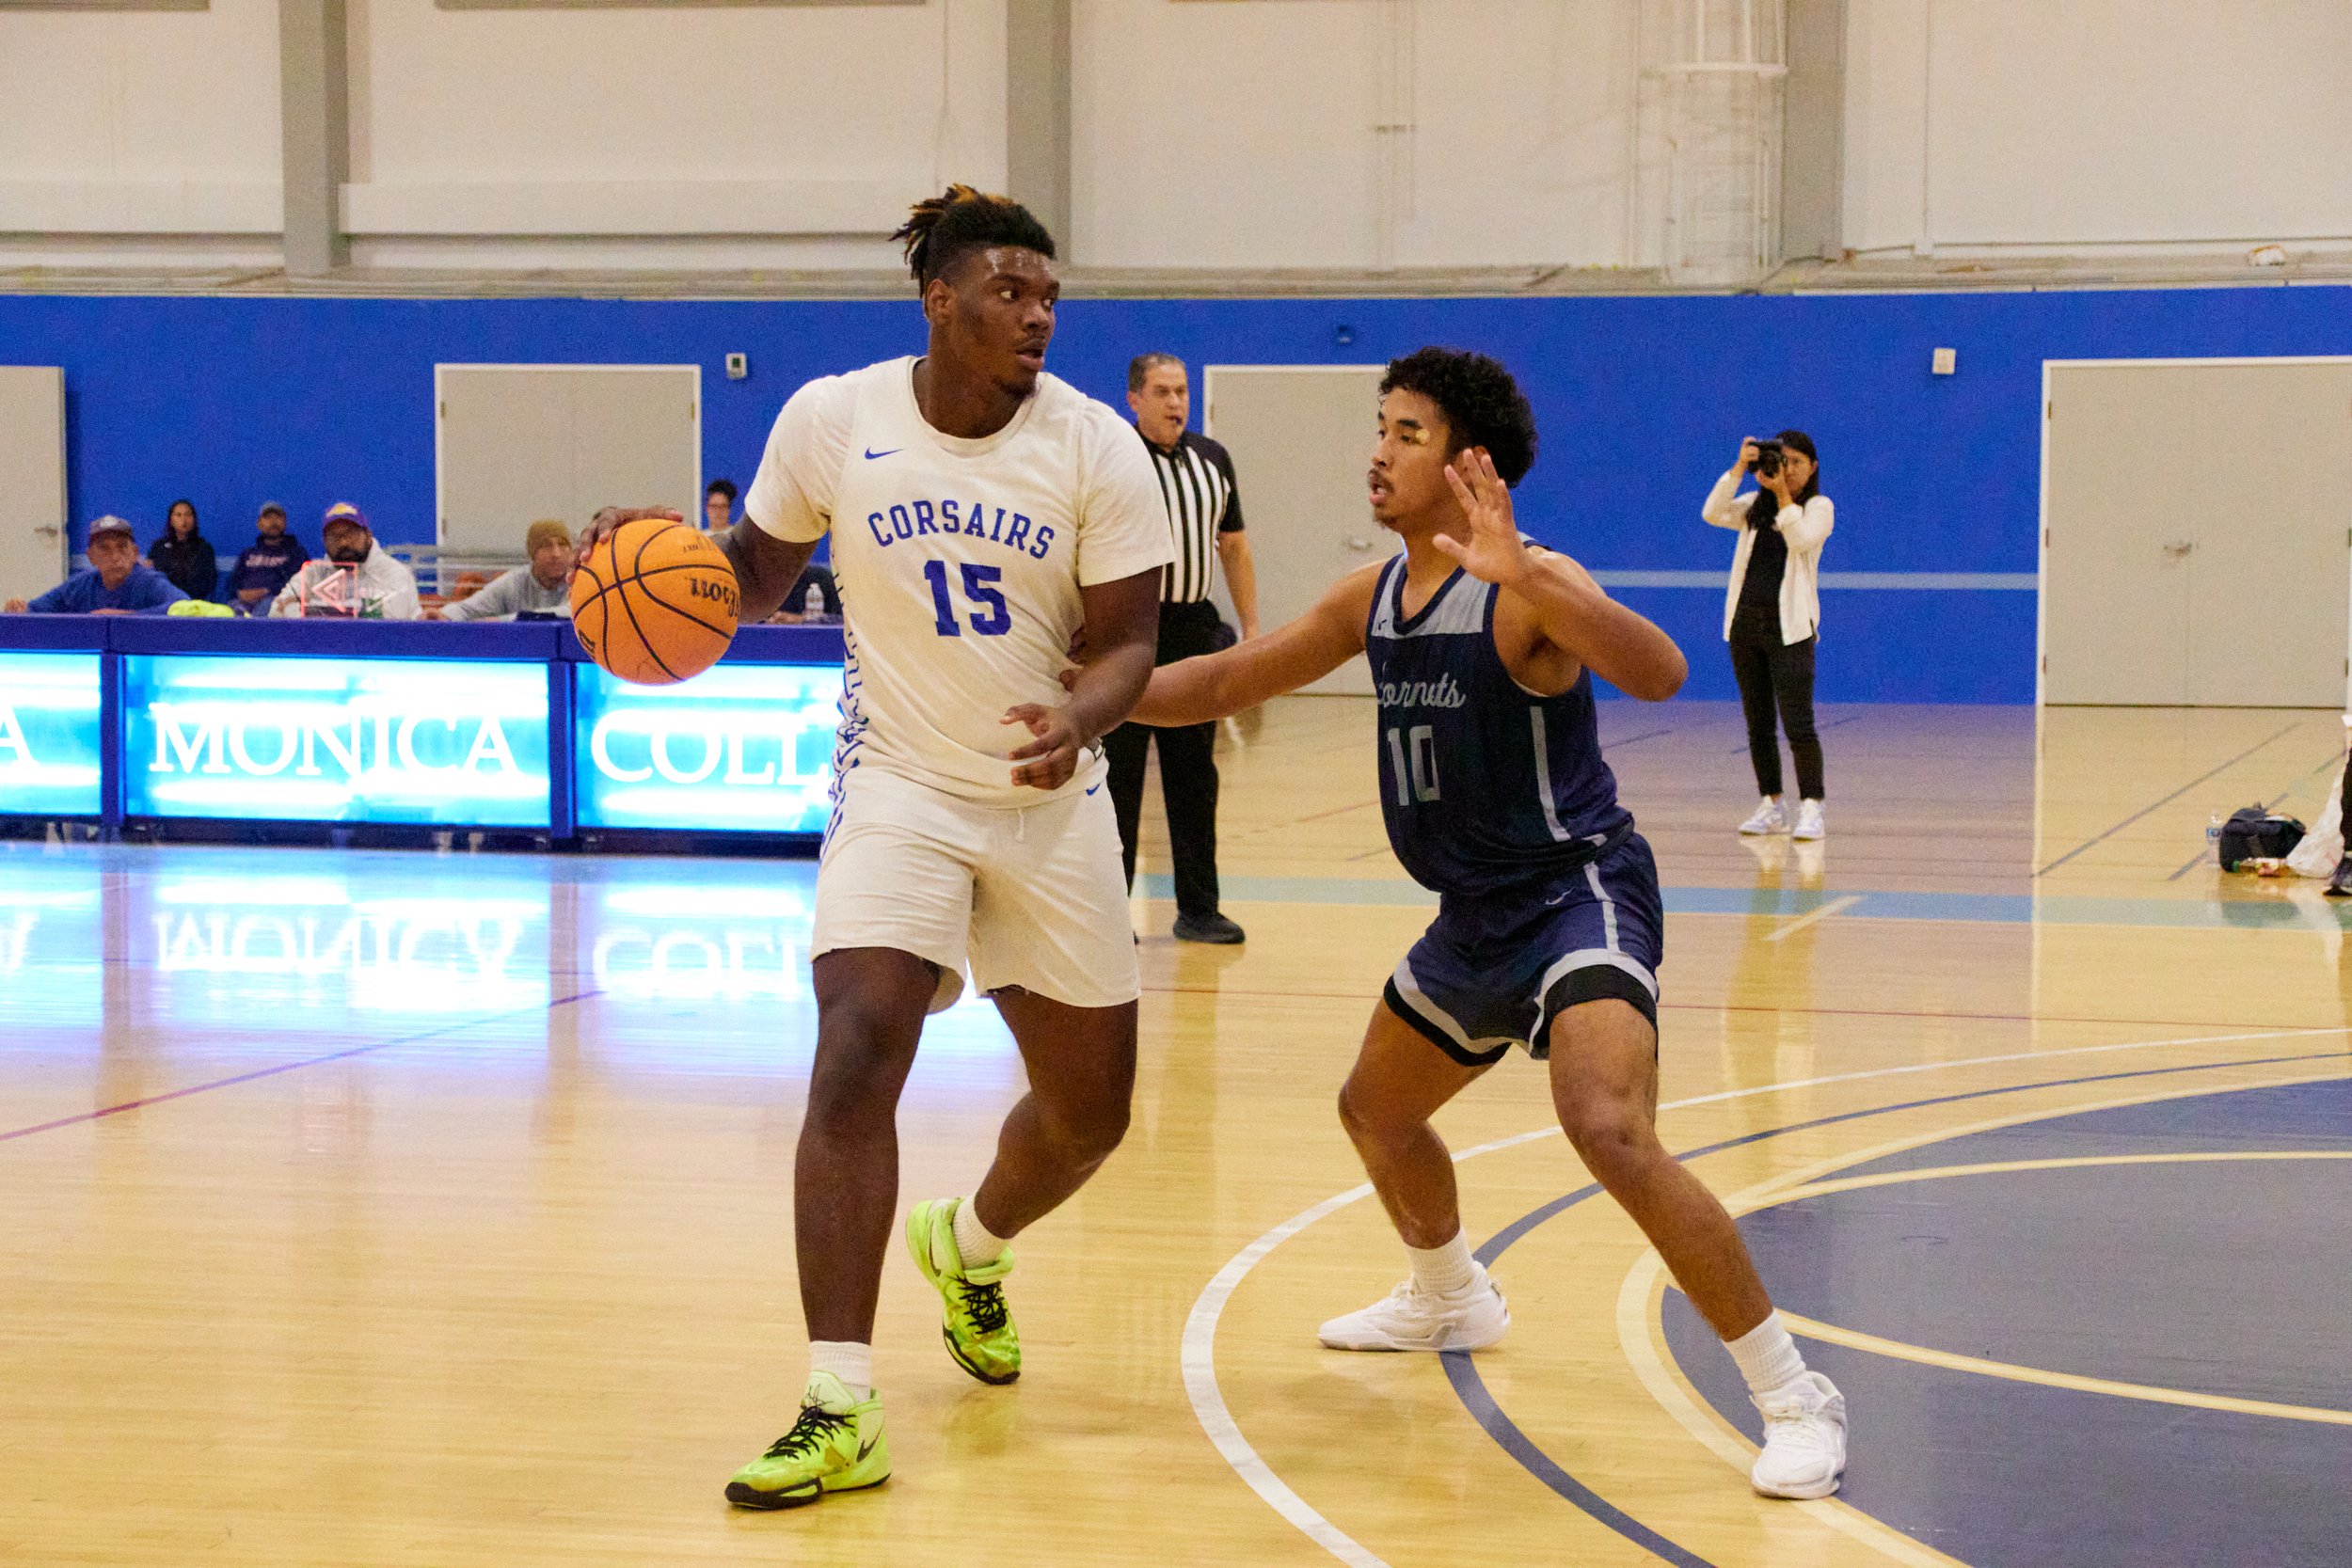  Santa Monica College Corsairs Point Forward David Solomon and Fullerton College Hornets Guard Alex Archer during the men's basketball match against each other at Corsair Gym, Santa Monica, Calif., on Oct 24, 2023. The Corsairs lost 76-66 (Danniel Su